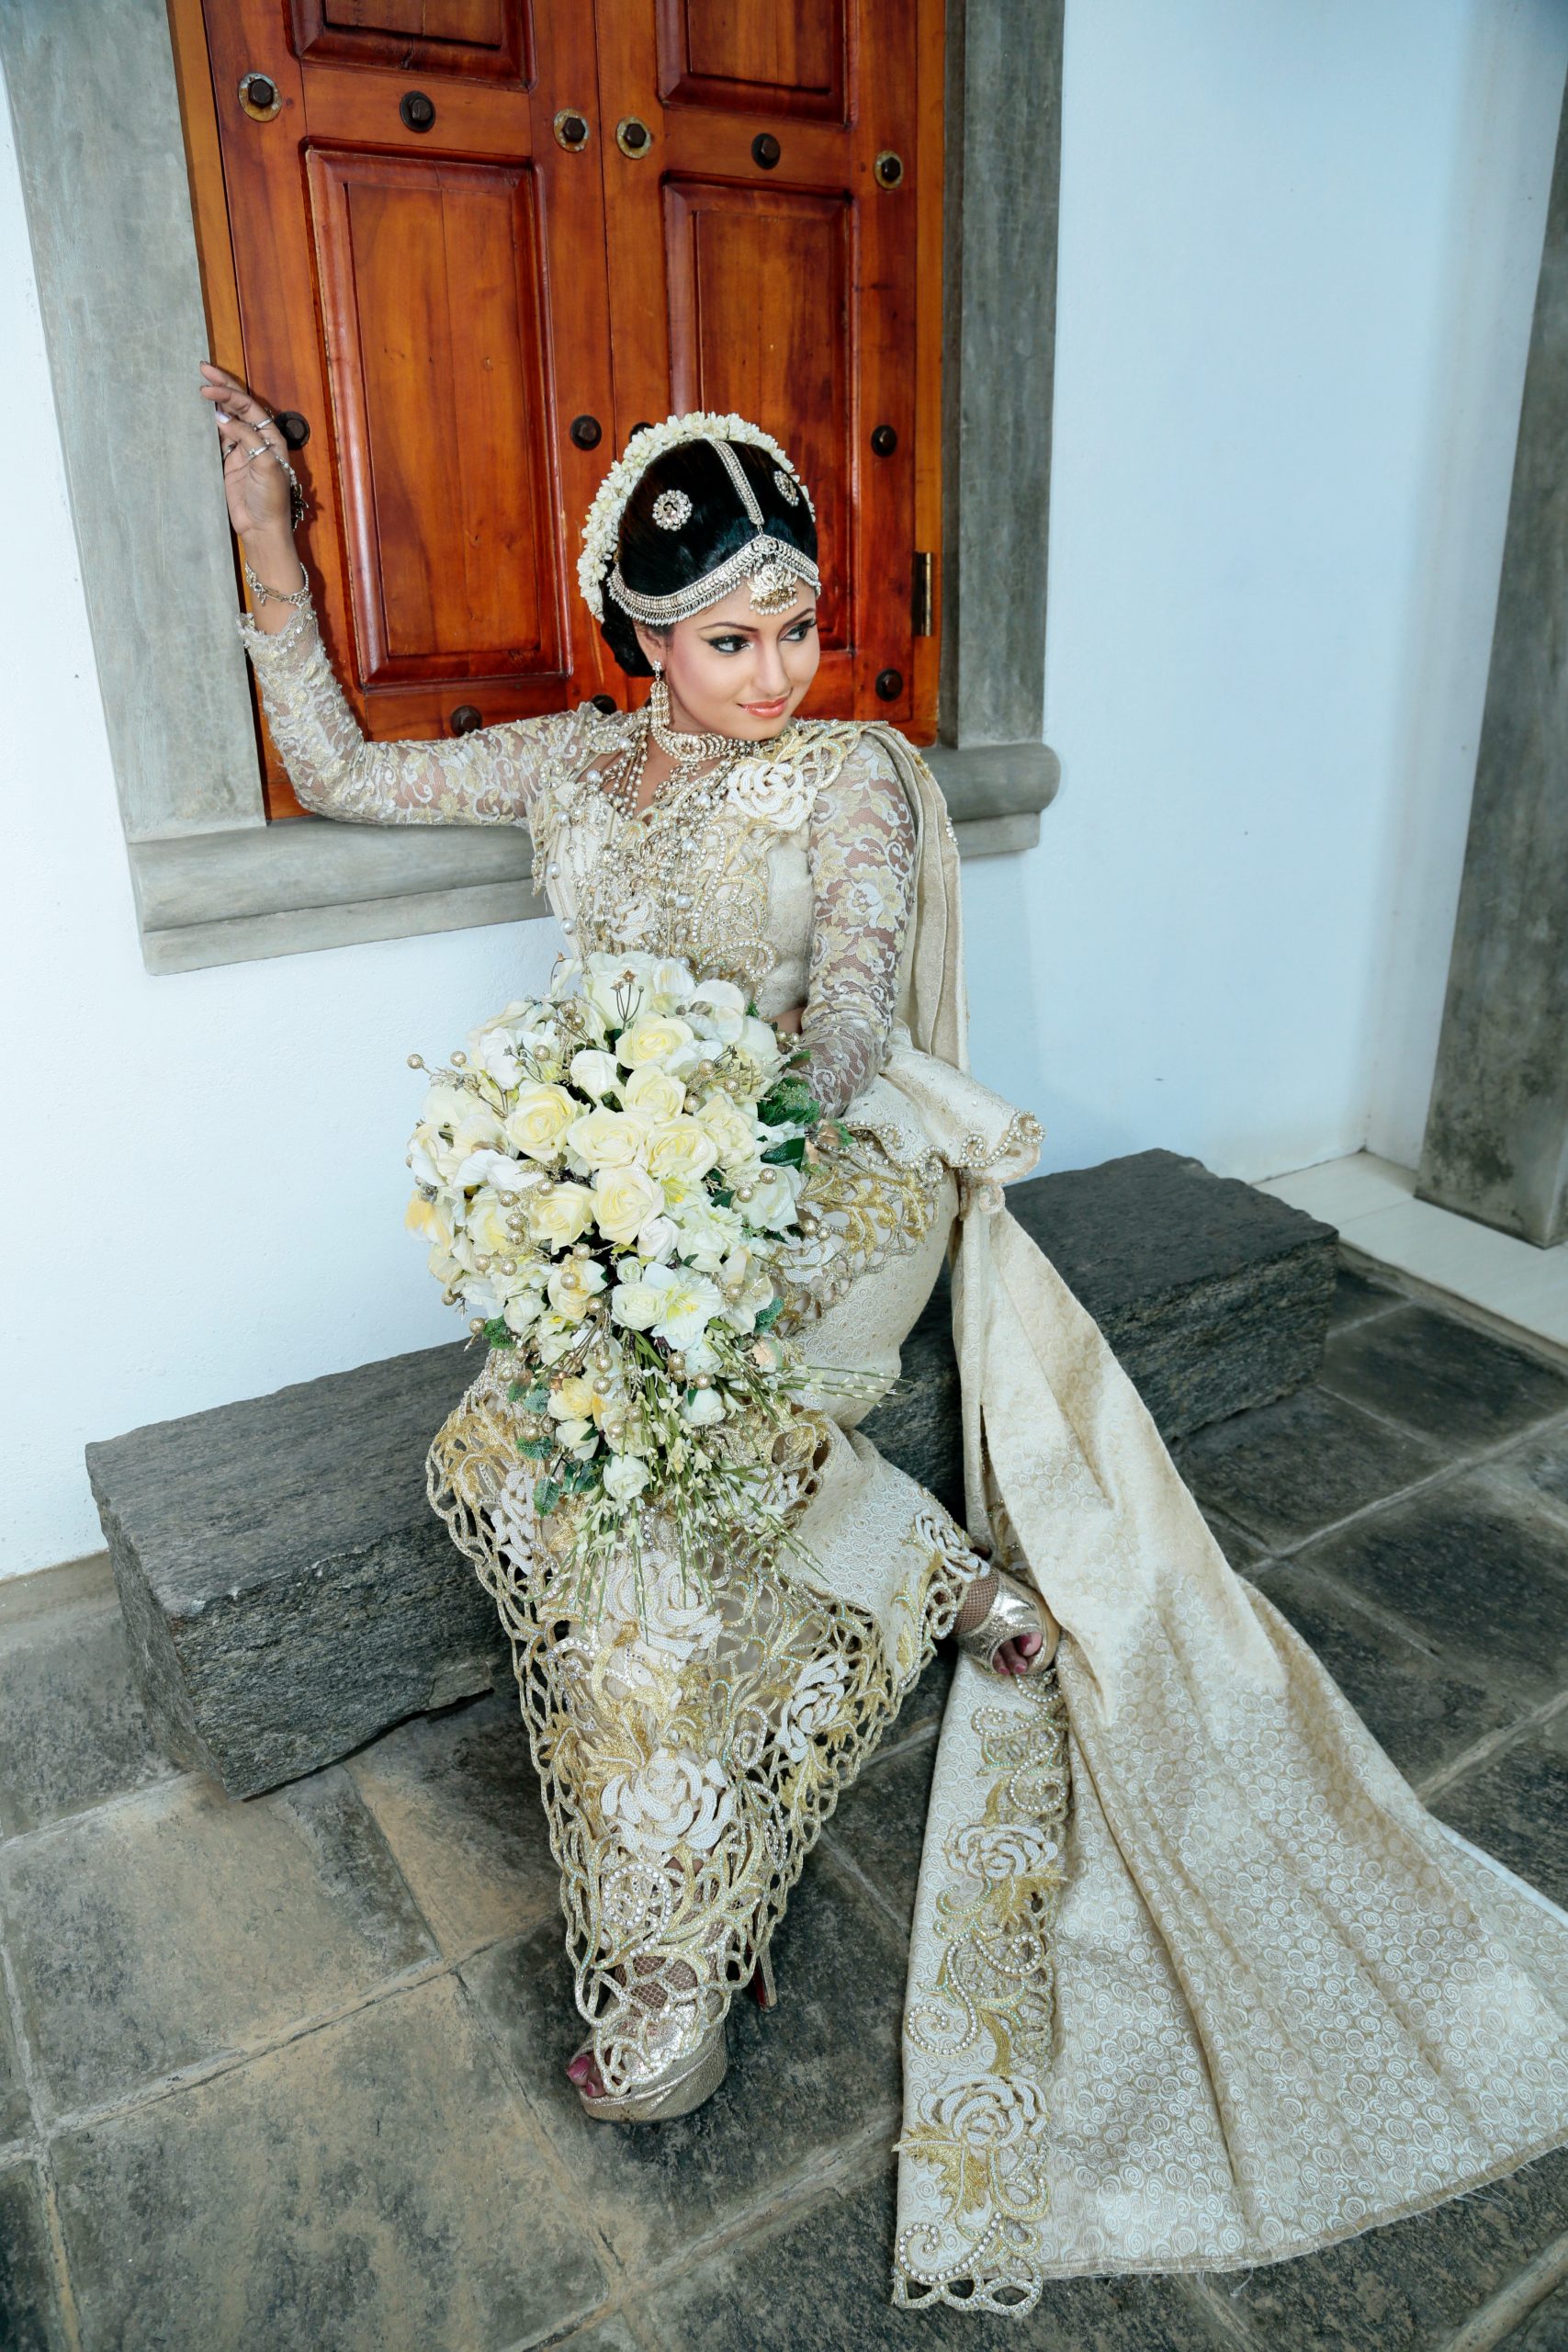 Take A Look At These Bridal Gown Images Before Choosing Your Outfit